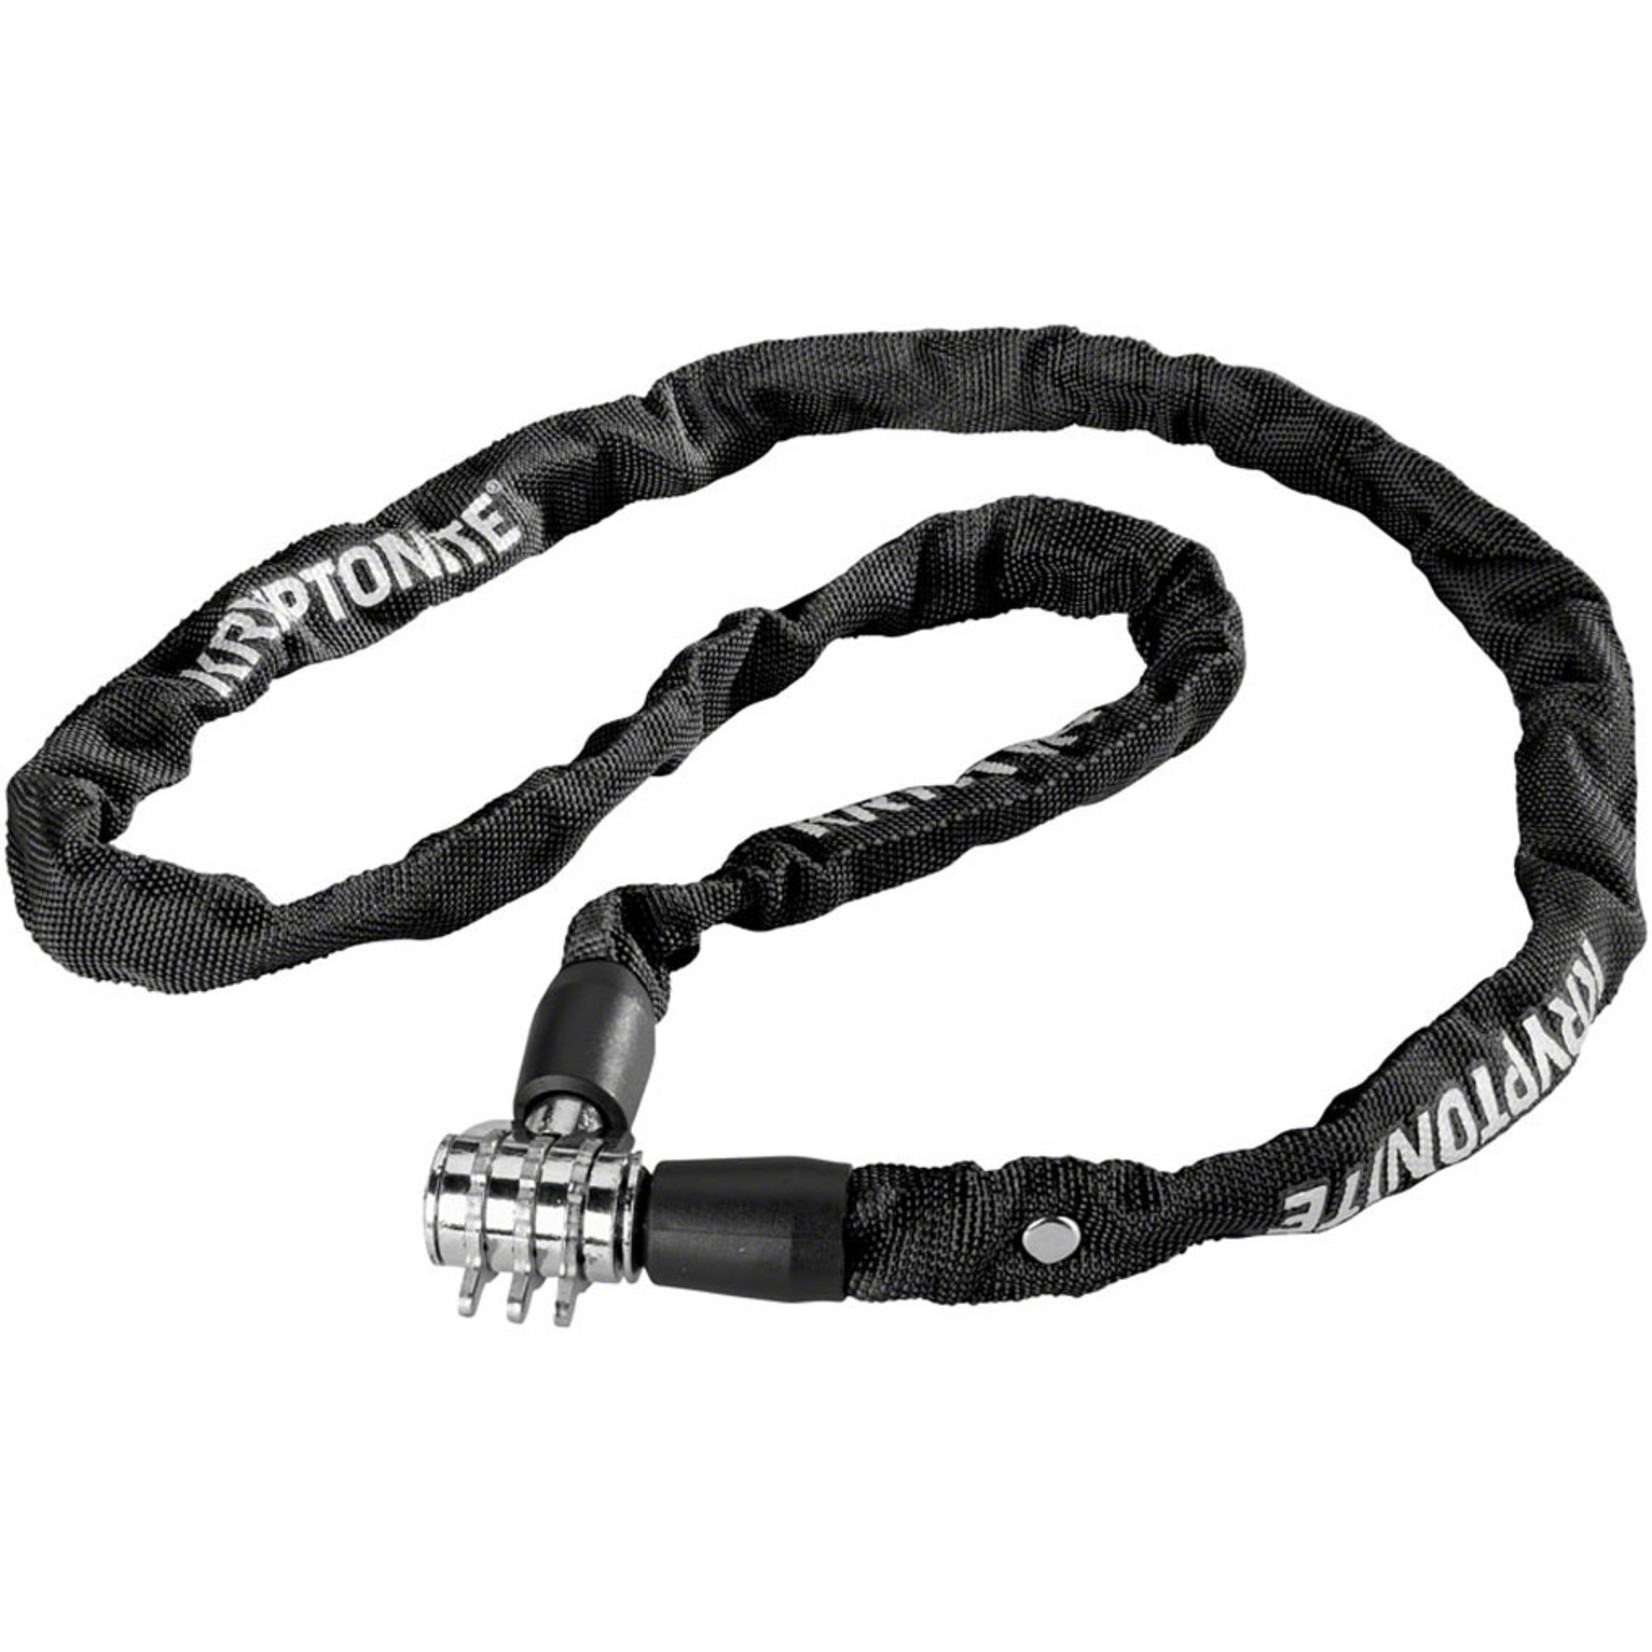 Kryptonite Keeper 411 Combo Chain, Black 4mm x 110cm - SoCal Bike -  Oceanside, Carlsbad and north San Diego county's favorite bike shop,  Bicycle and ebike rentals, sales, and service